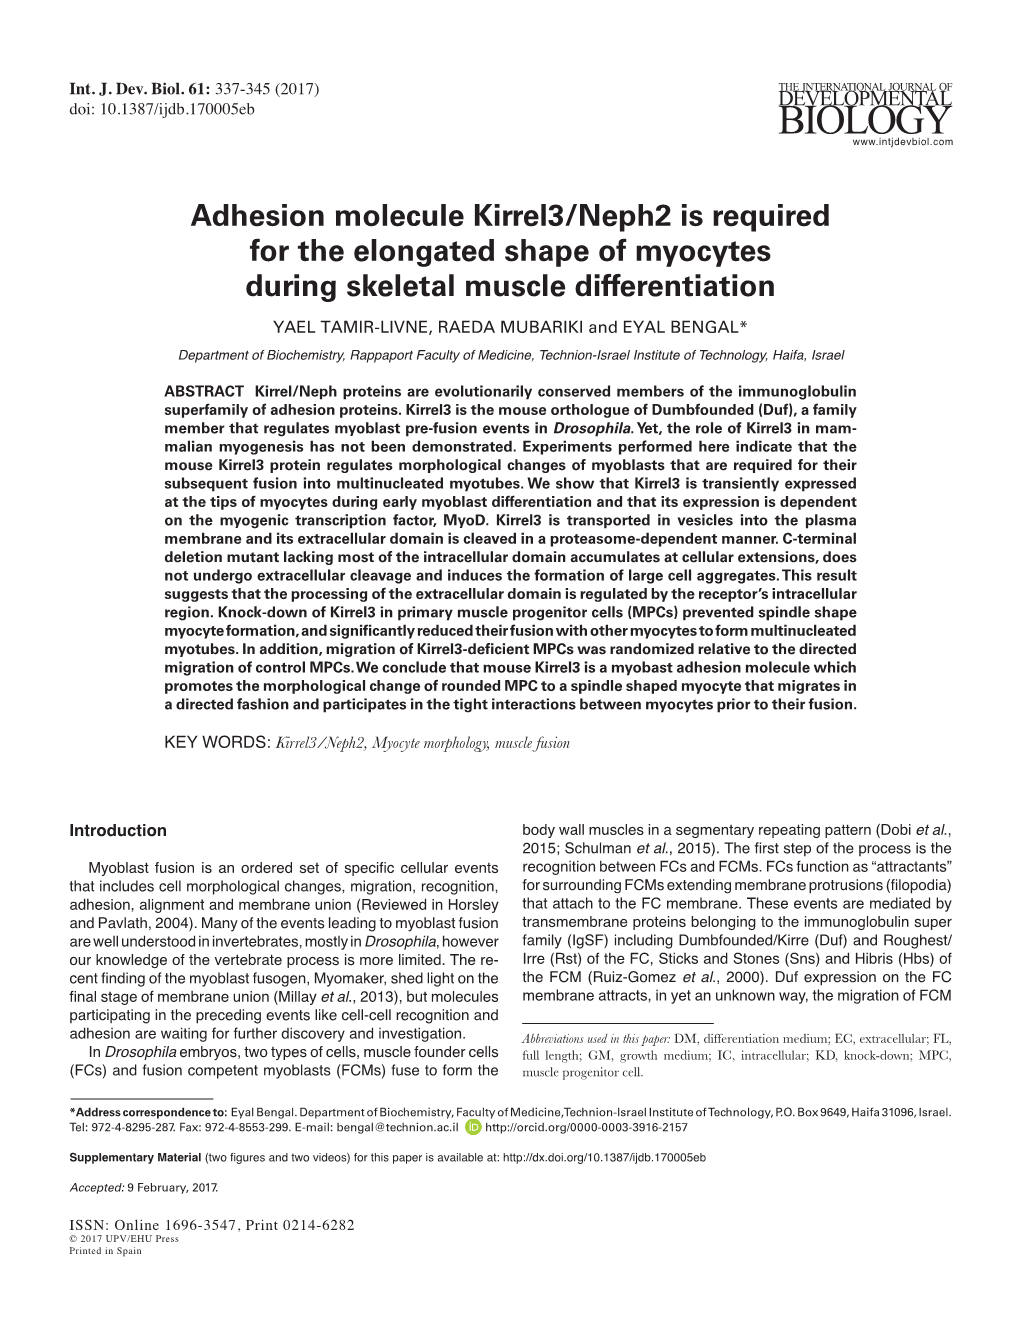 Adhesion Molecule Kirrel3/Neph2 Is Required for the Elongated Shape Of